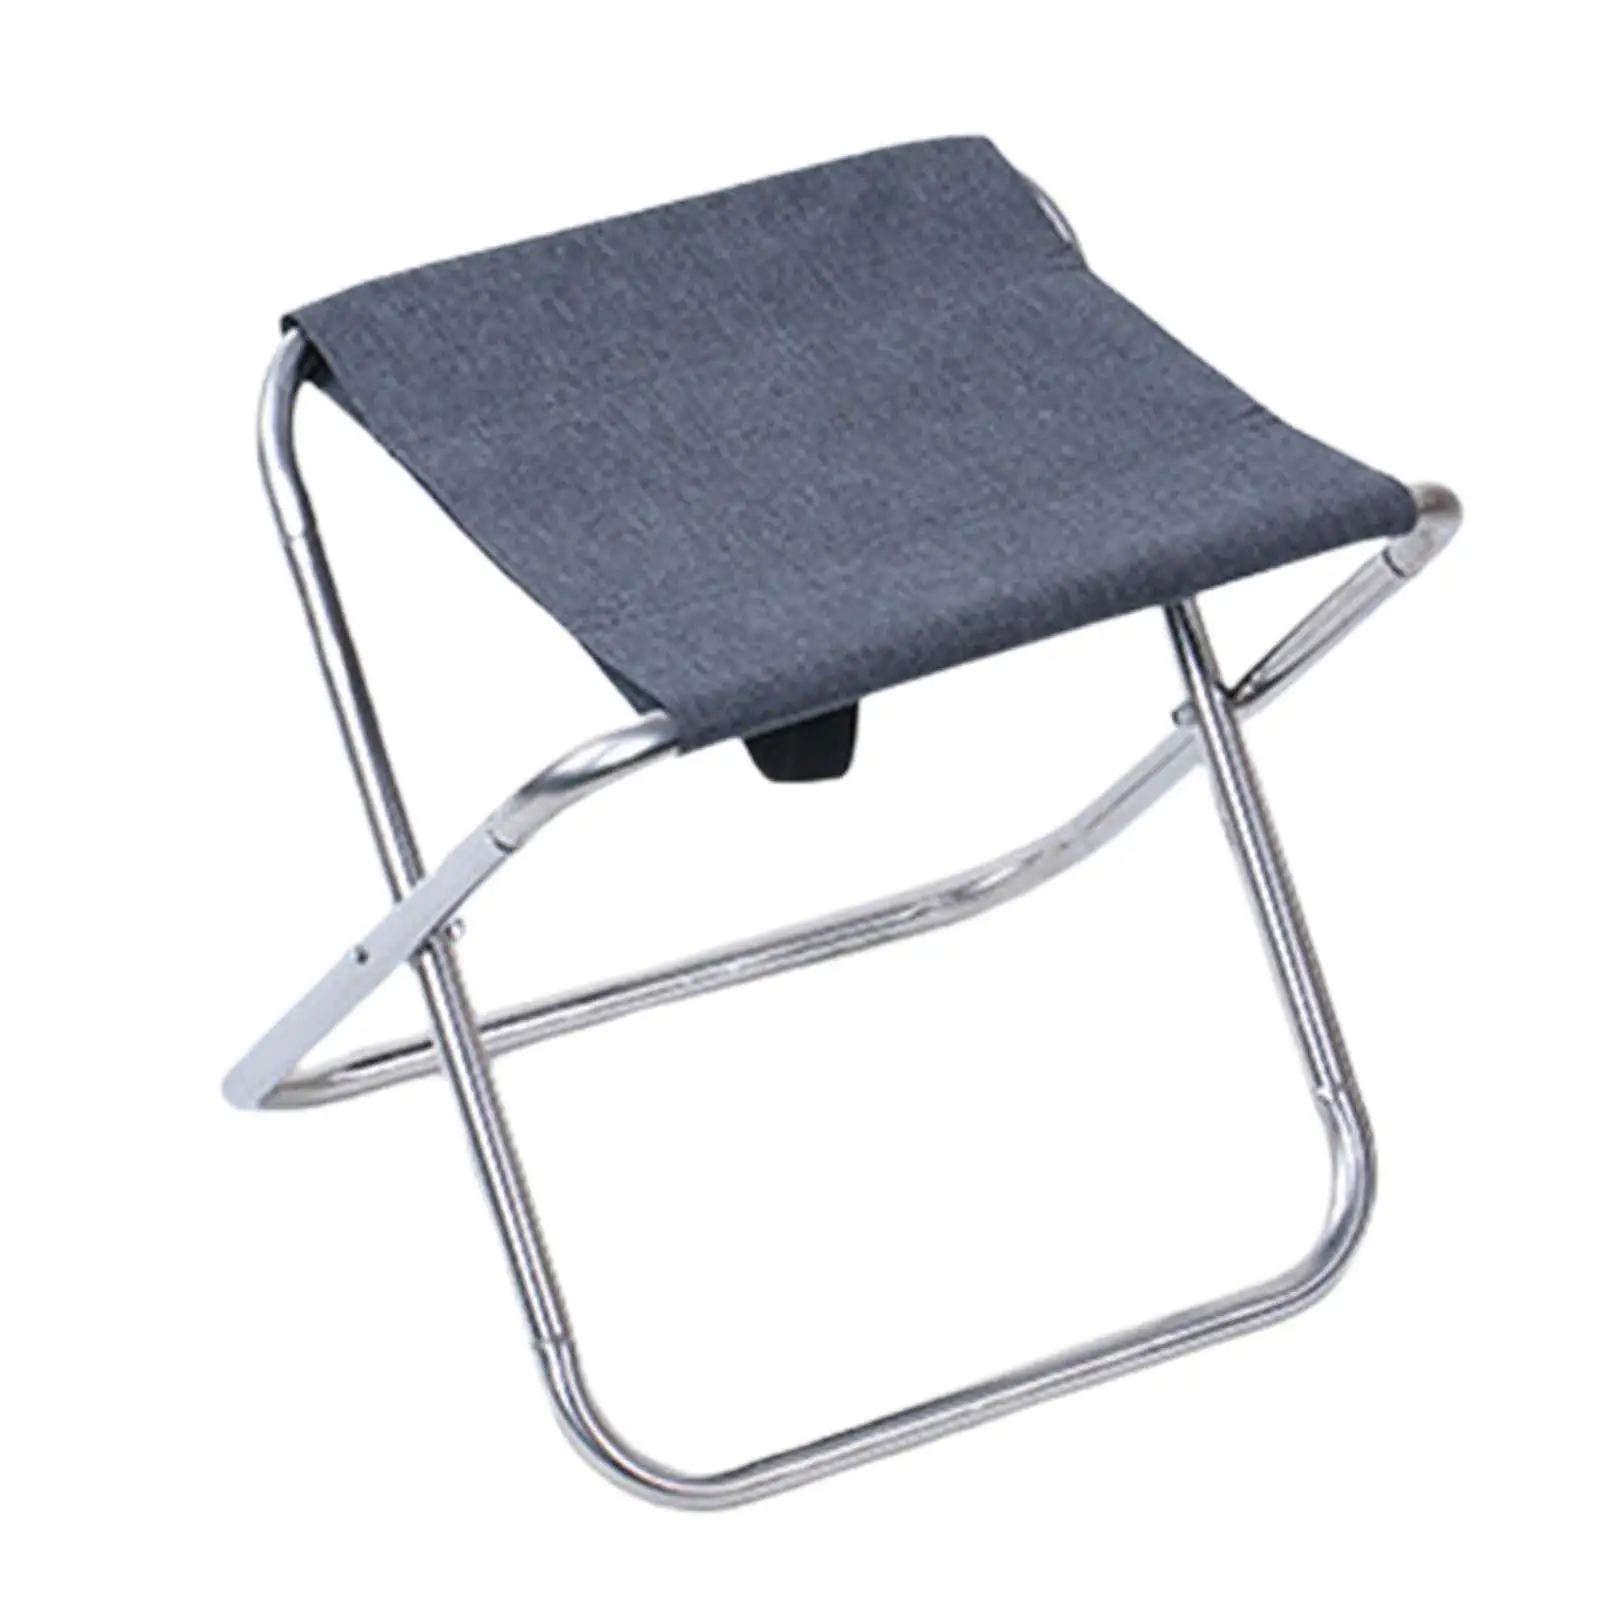 Folding Stool Camping Outdoor Foldable Lightweight Fishing Seat Reusable Saddle Chair for Garden Travel Backyard Hiking Party